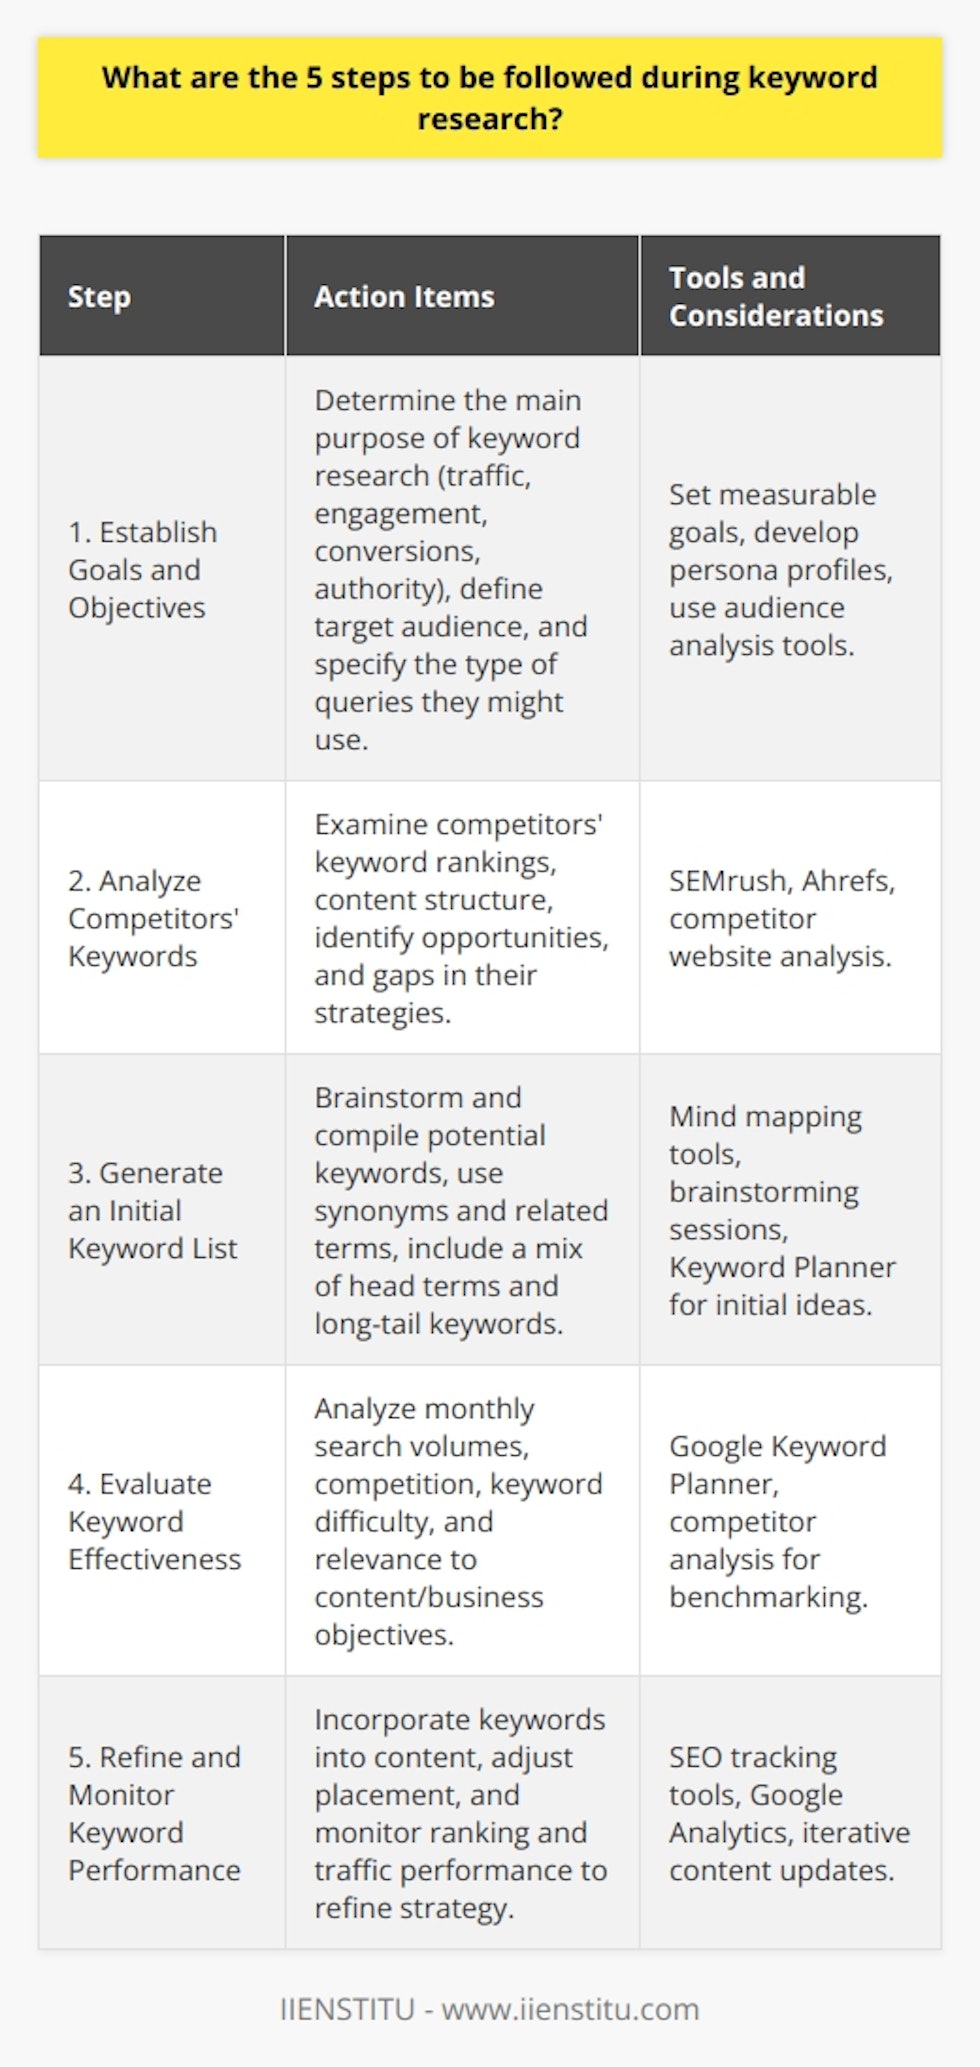 Keyword research is a fundamental aspect of SEO and content marketing that helps position your content favorably in search engine results. By identifying the terms and phrases your audience is searching for, you can tailor your content to their needs and improve your chances of being found online. The five crucial steps to effective keyword research include setting clear goals, analyzing competitors, generating a keyword list, evaluating keyword effectiveness, and refining and monitoring performance. 1. **Establish Goals and Objectives:** The first step is to determine what you want to achieve with your keyword research. Are you looking to drive traffic, increase engagement, improve conversions, or establish thought leadership? Having clear goals will help guide your keyword strategy and measure its success. Define your target audience and consider what kind of search queries they might use to find your content.2. **Analyze Competitors' Keywords:** A critical element of keyword research is understanding the competitive landscape. Look at what keywords competitors are ranking for and how they structure their content to accommodate those words. This can provide a benchmark and reveal gaps in their strategy that you can exploit. Tools like SEMrush or Ahrefs can help identify these keywords, but there's no need to use those specific brands.3. **Generate an Initial Keyword List:** With the insights from the previous steps, brainstorm an initial list of keywords. Consider using mind mapping or brainstorming tools to expand on your ideas, including synonyms, related terms, and questions that potential readers might ask. Remember to include a mix of head terms (short and broad) and long-tail keywords (longer phrases that are more specific) as they can cater to different stages in the buyer's journey.4. **Evaluate Keyword Effectiveness:** Now it's time to validate the potential of your keywords. Look at metrics such as monthly search volume, competition, and keyword difficulty. Keywords that have a high search volume but low competition may offer the best opportunities. Google's Keyword Planner is a handy tool for this purpose. Additionally, assess the relevancy of each keyword to ensure it aligns with your content and business objectives.5. **Refine and Monitor Keyword Performance:** Once you have a list of keywords, incorporate them into your content strategically. Ensure they appear in titles, headers, and throughout the content in a way that reads naturally. Use tools to monitor how your keywords are performing in terms of rankings and traffic. Based on this performance data, refine your strategy by making adjustments as needed – this could mean revisiting previous steps to identify new opportunities or adapt to changes in search behavior.In summary, keyword research is a dynamic process that requires continuous attention to adapt to changing market trends and search patterns. By diligently following these five steps, you can ensure your content resonates with your audience and performs well in search engine results. Remember, the aim is to connect with your readers by providing value through your content, with keywords serving as the bridge between their queries and your solutions.